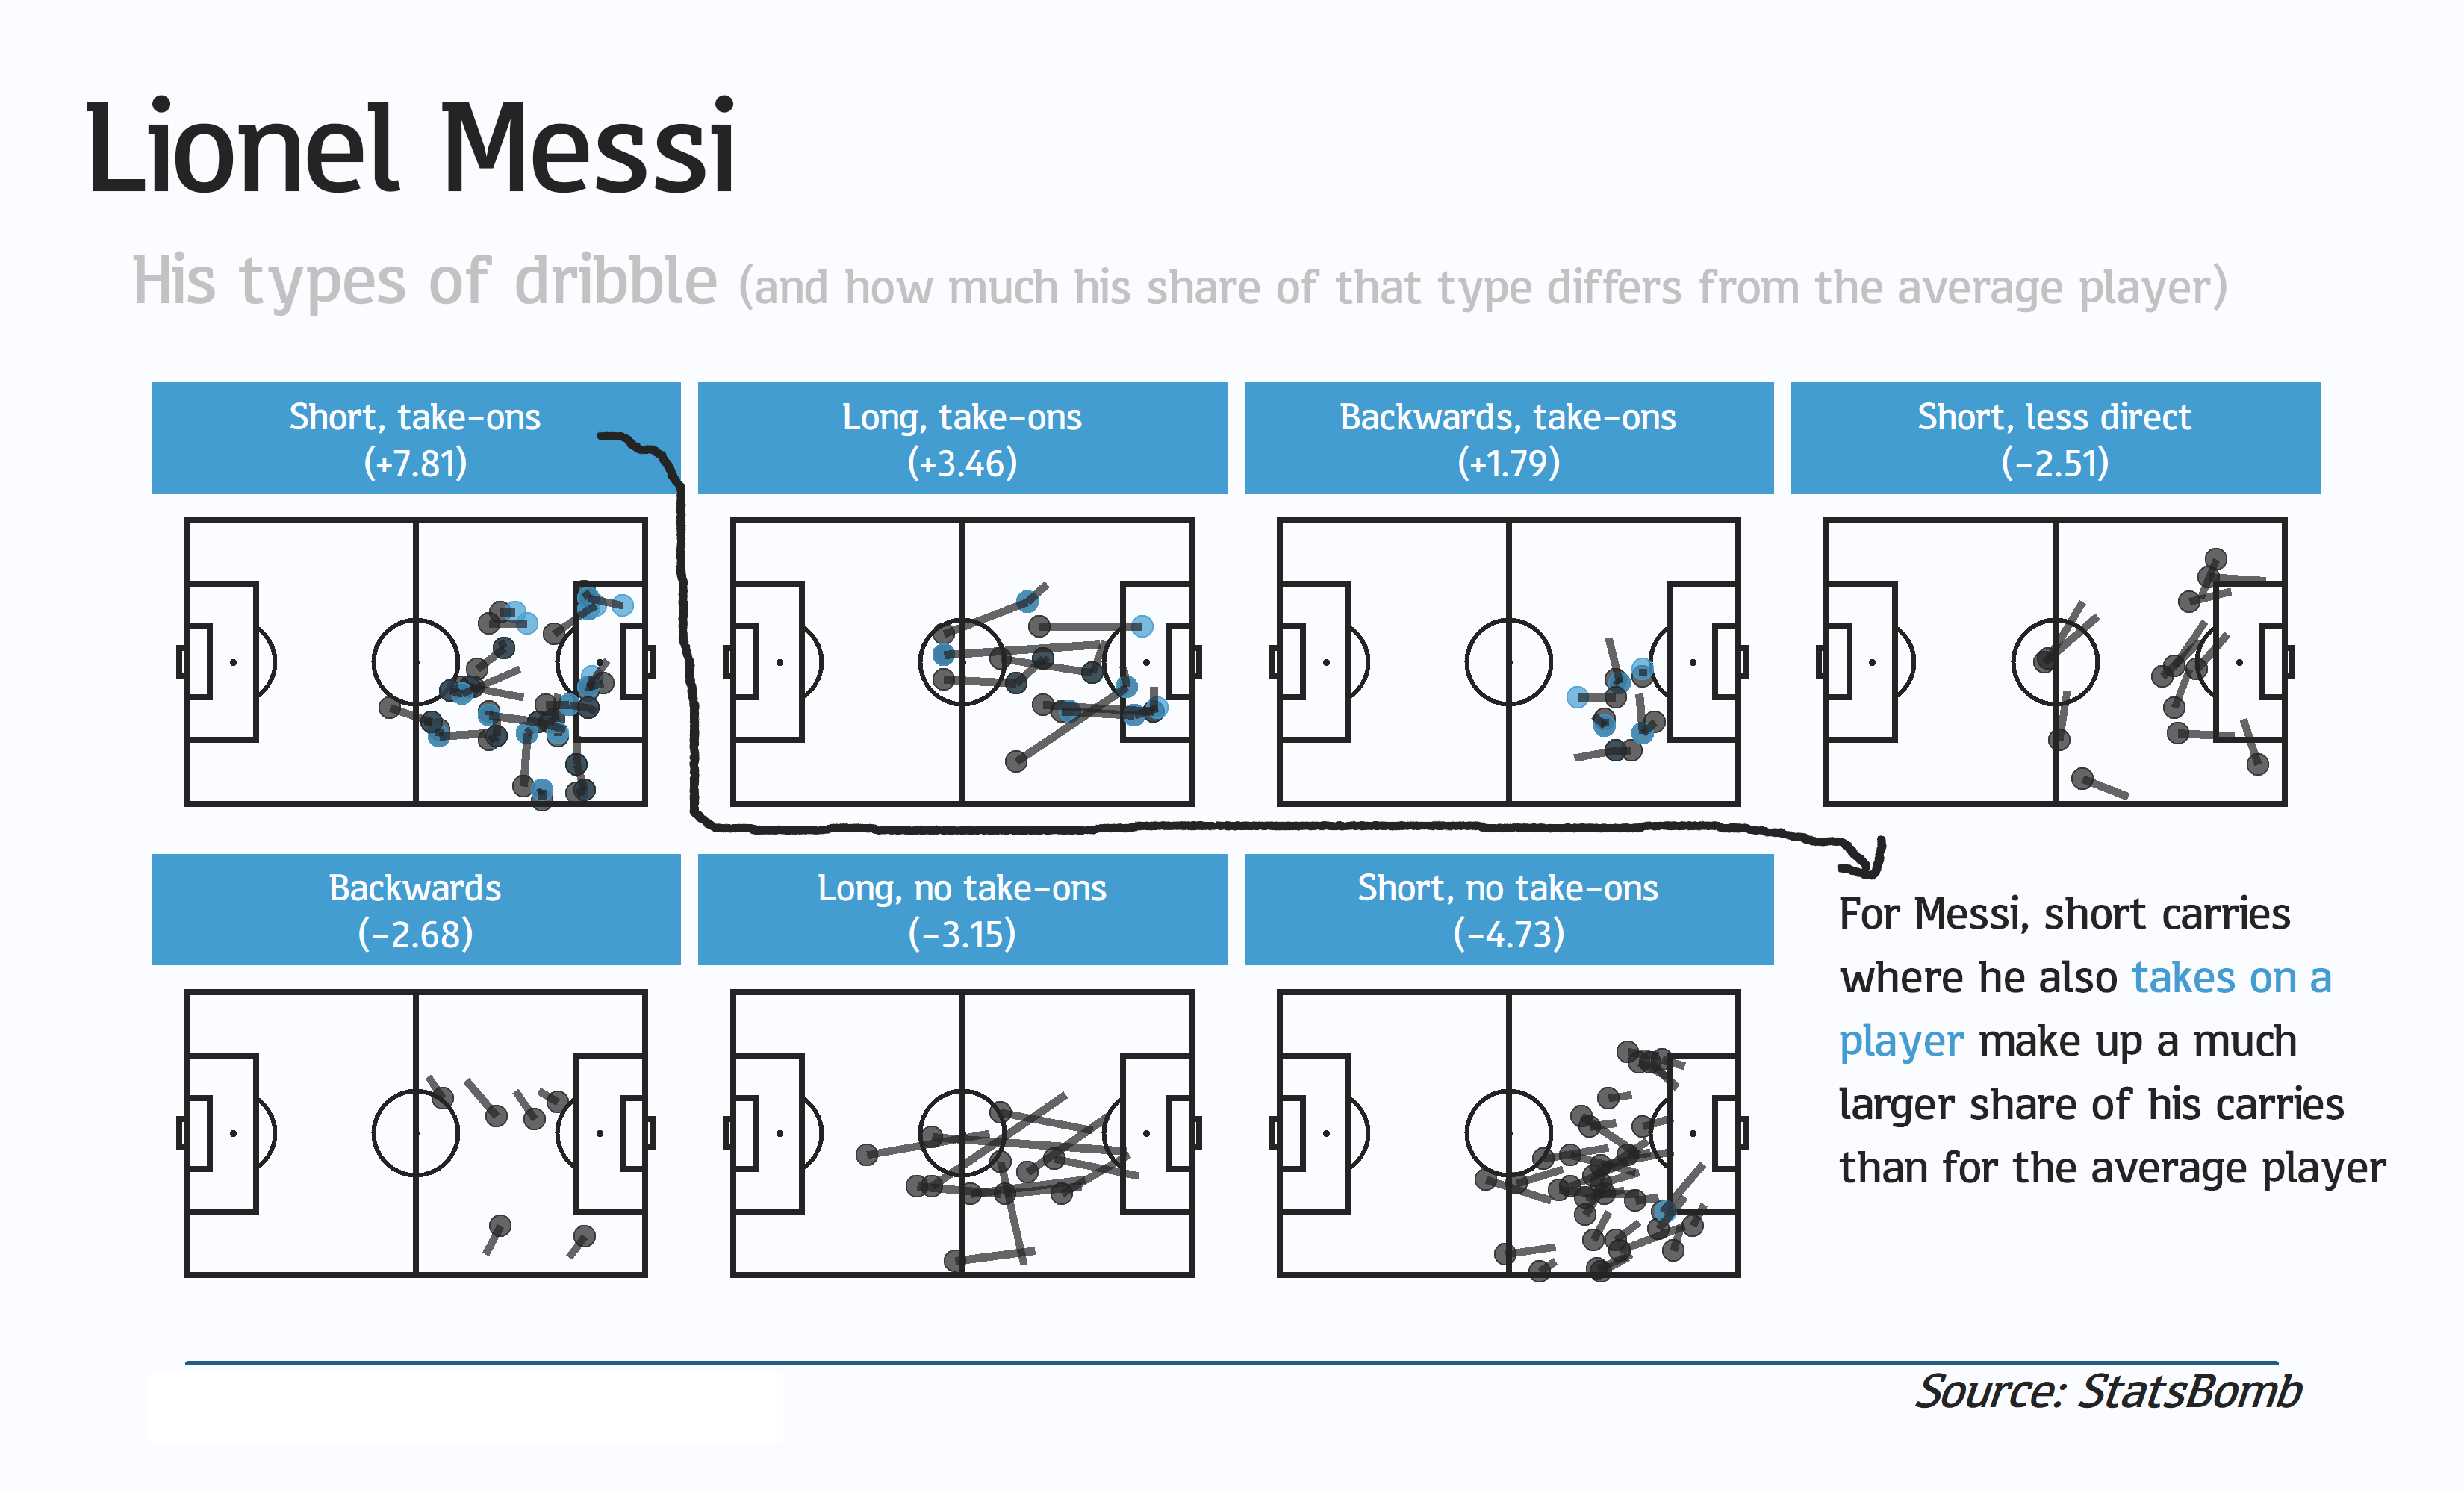 A graphic showing the seven cluster types and how Messi differs from the average -- his short dribbles involving take-ons make up a particularly larger share of his dribbles than average